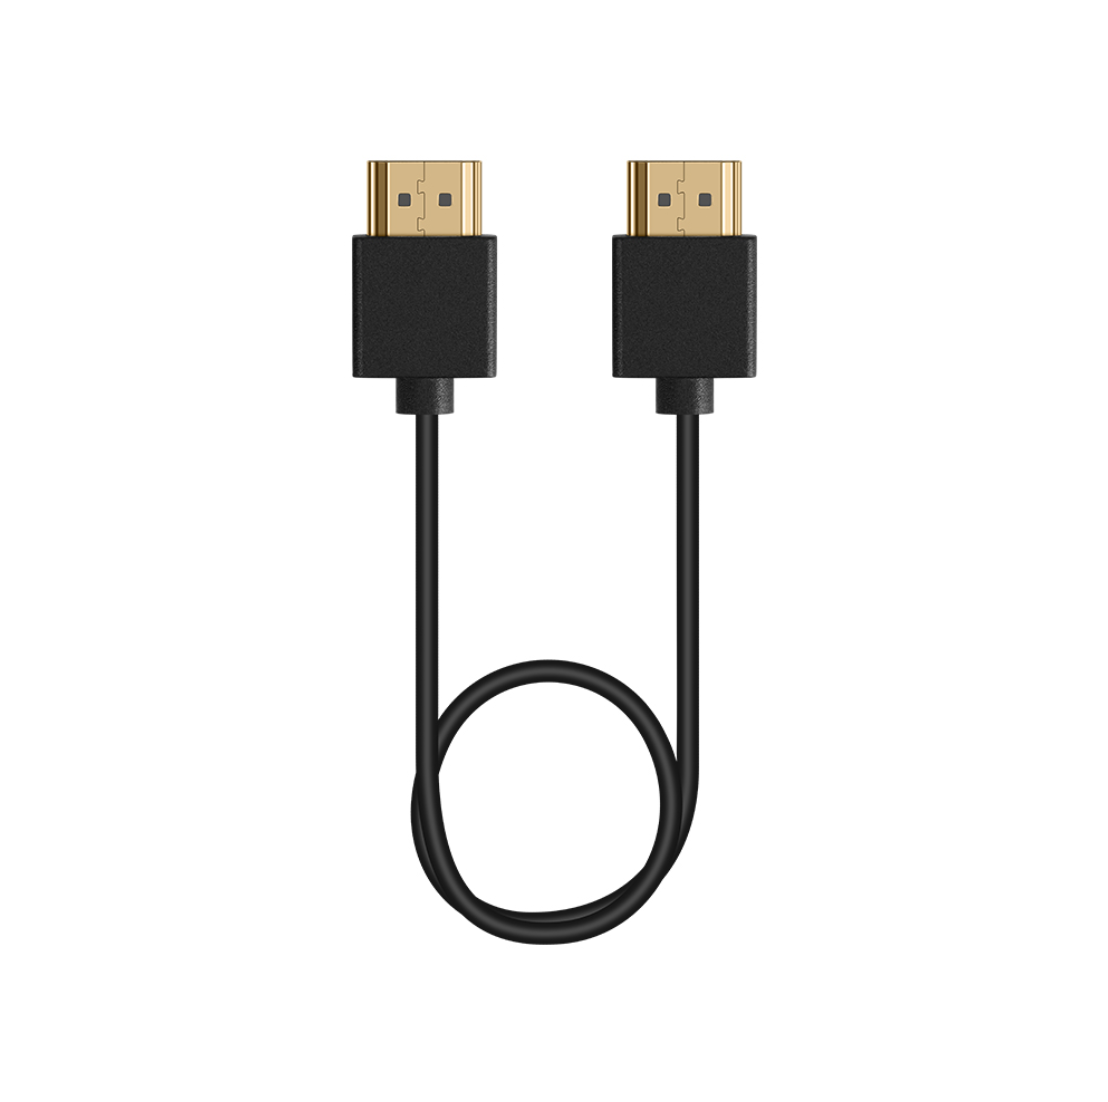 HDMI Cable（A Male to A Male）